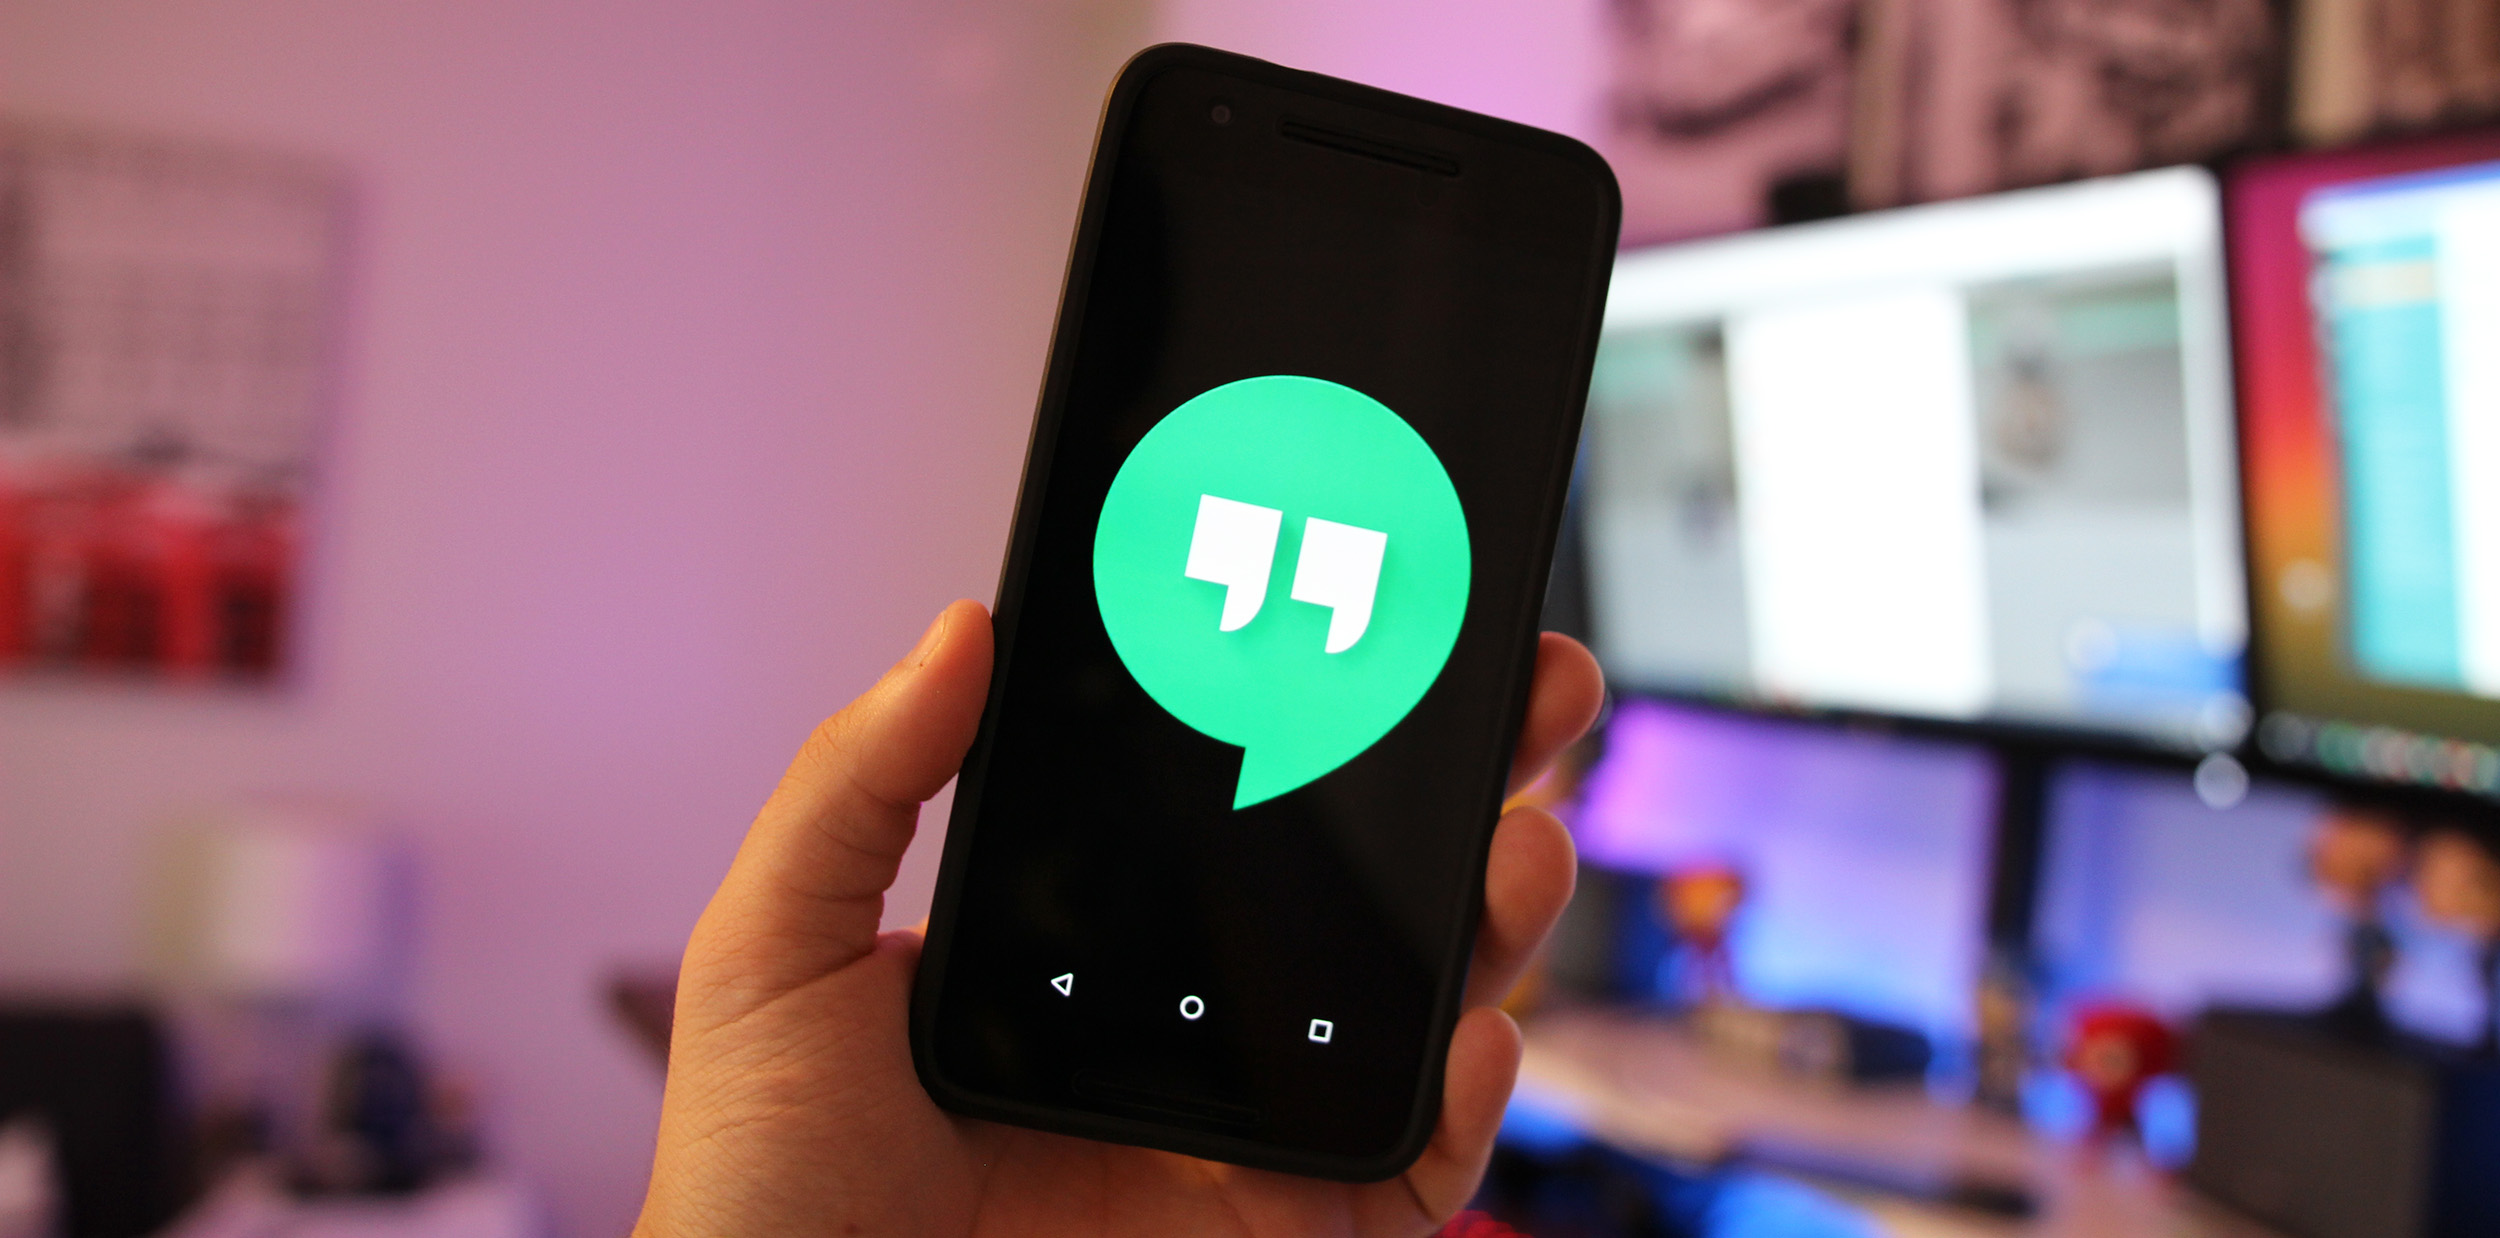 how to download google hangouts chat history